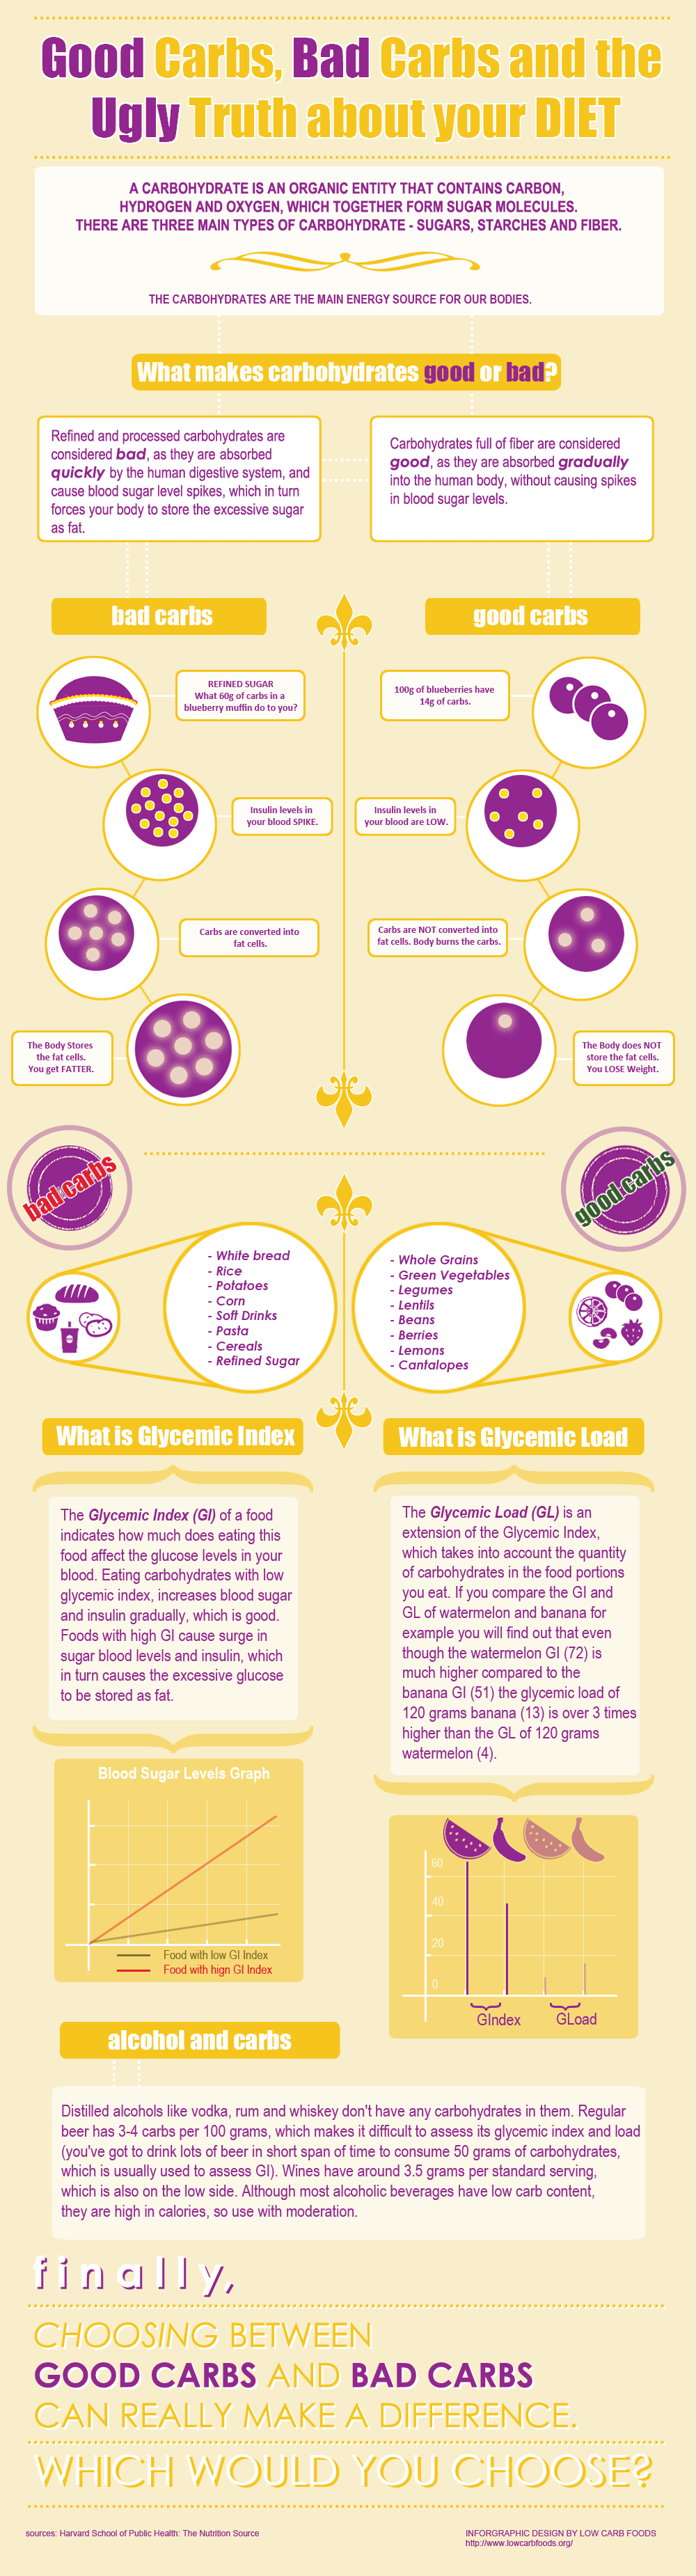 Good-Carb-And-Bad-Carbs-About-Your-Diet-infographic